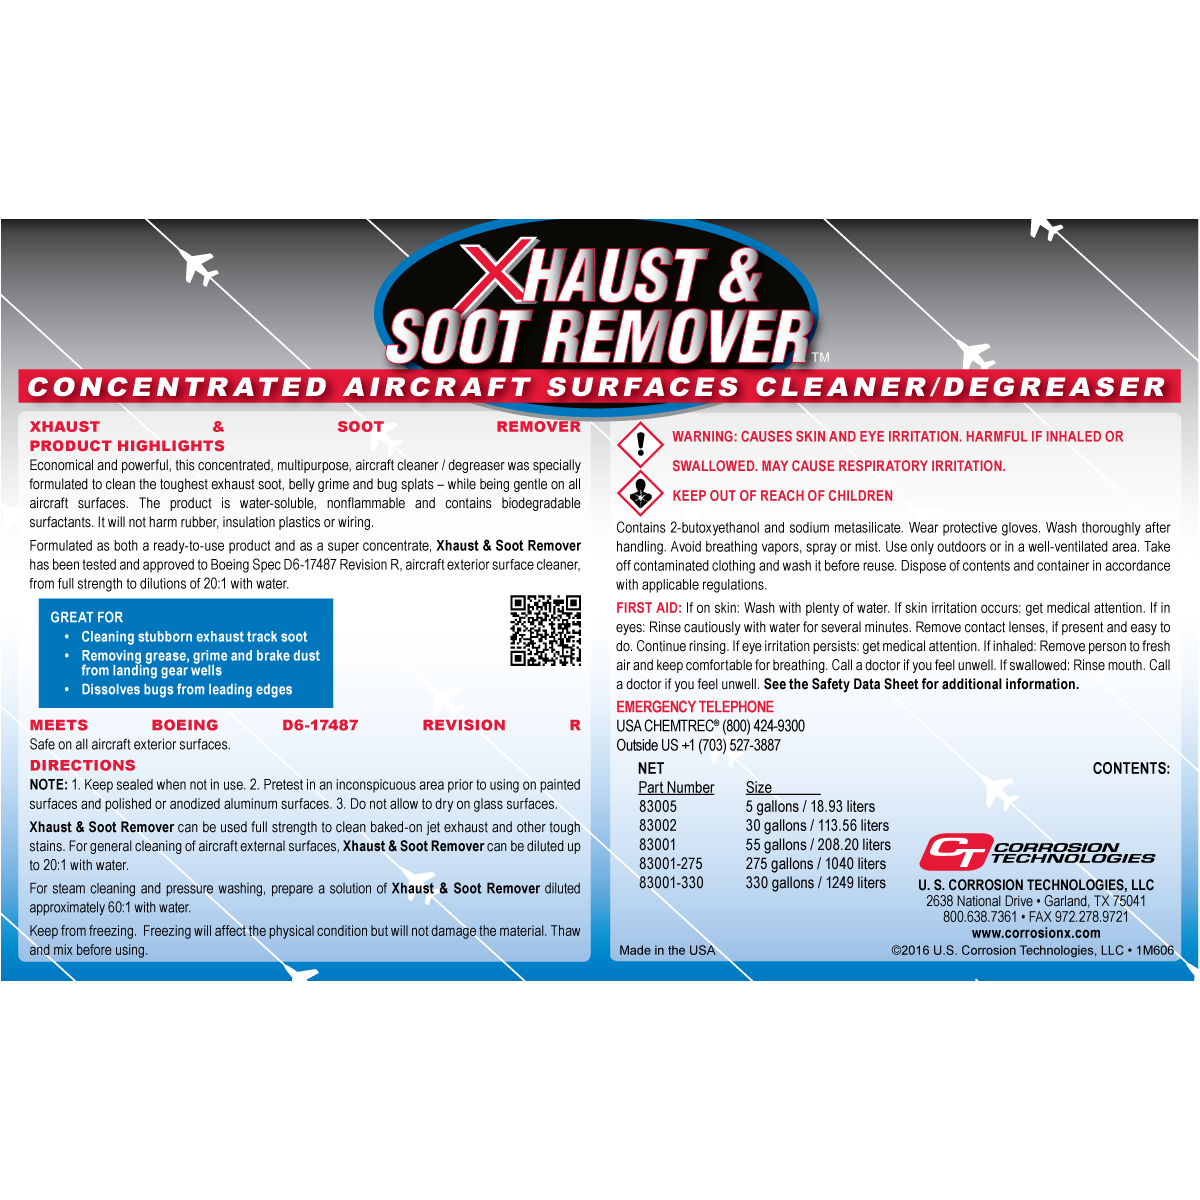 Xhaust & Soot Remover